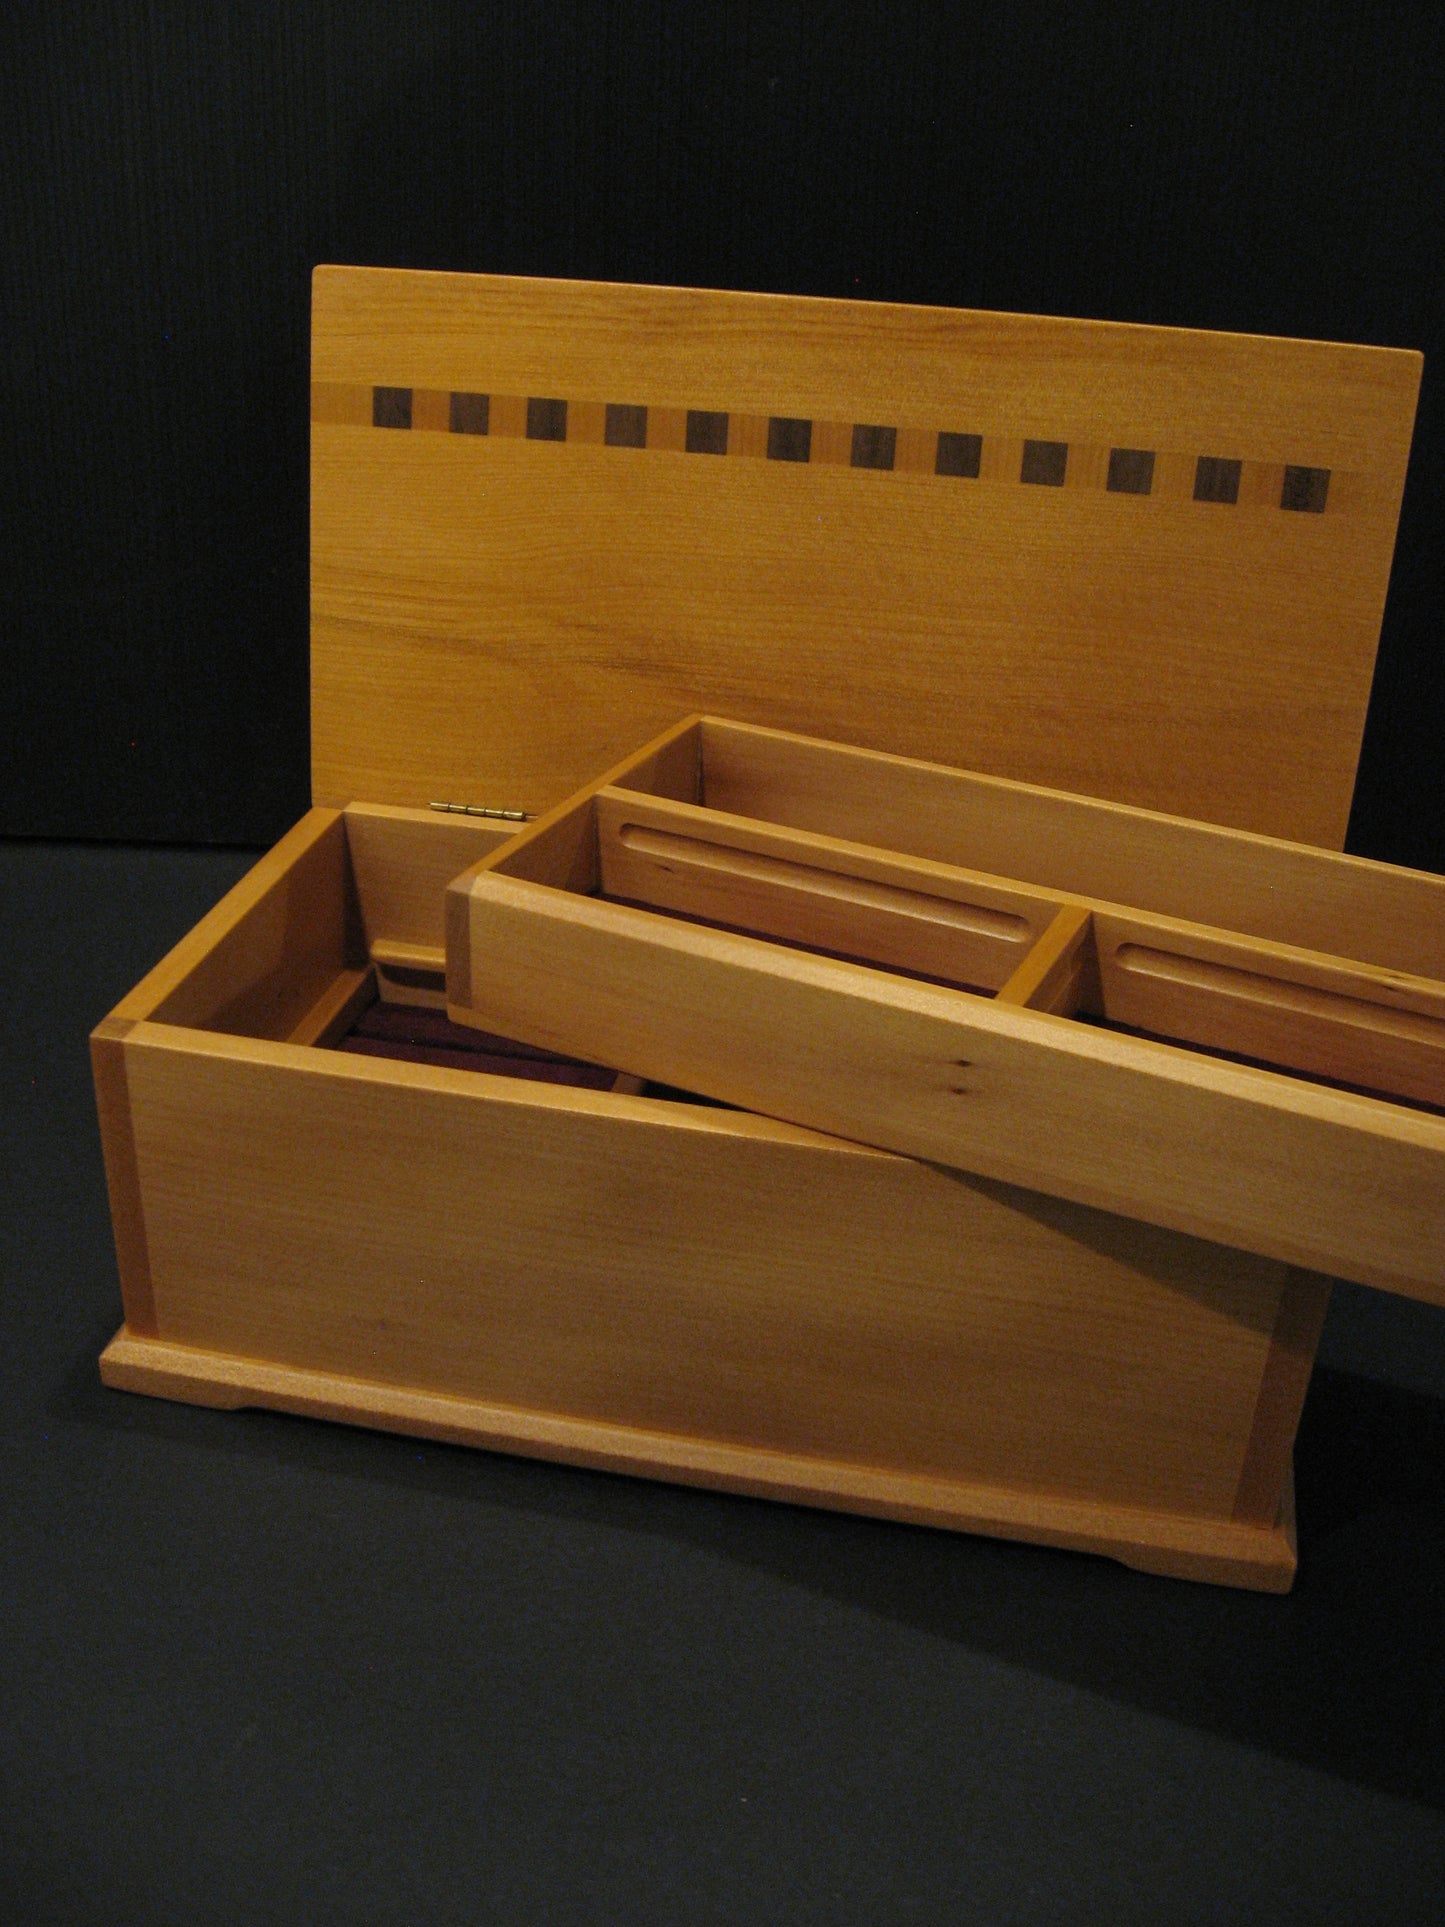 Inside of Deluxe Kauri Wooden Jewellery Box by Timber Arts NZ Silver Fern Gallery